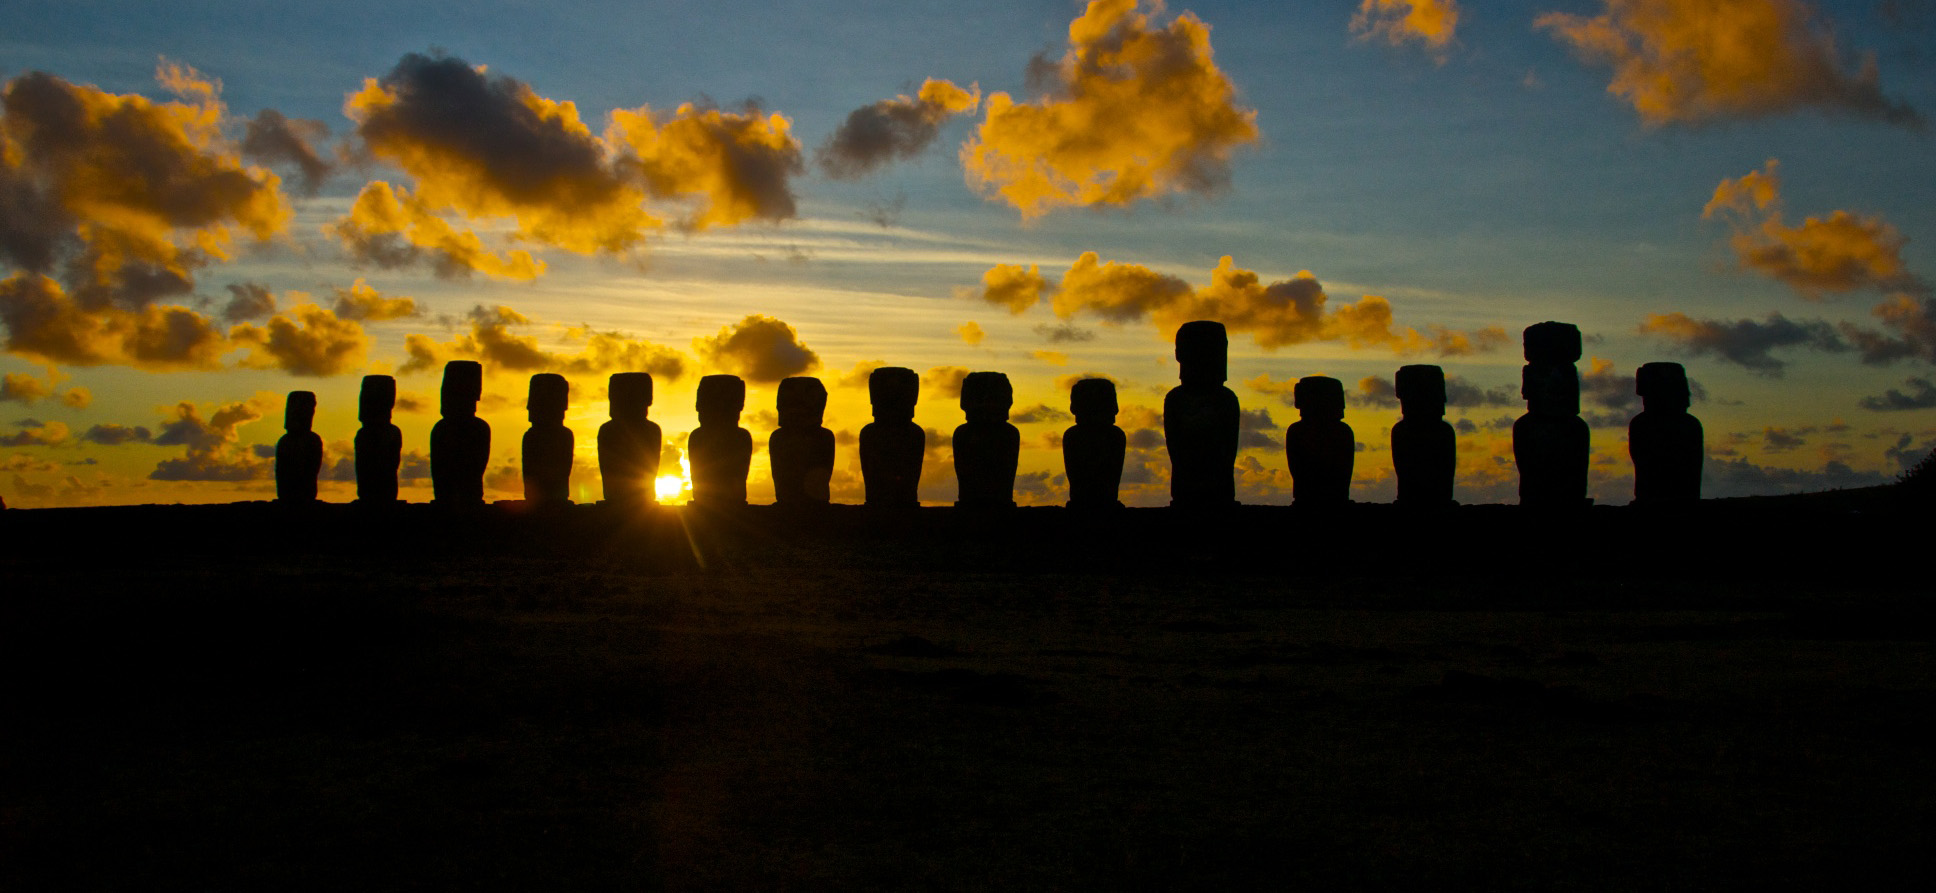 Easter Island, my oldest dream